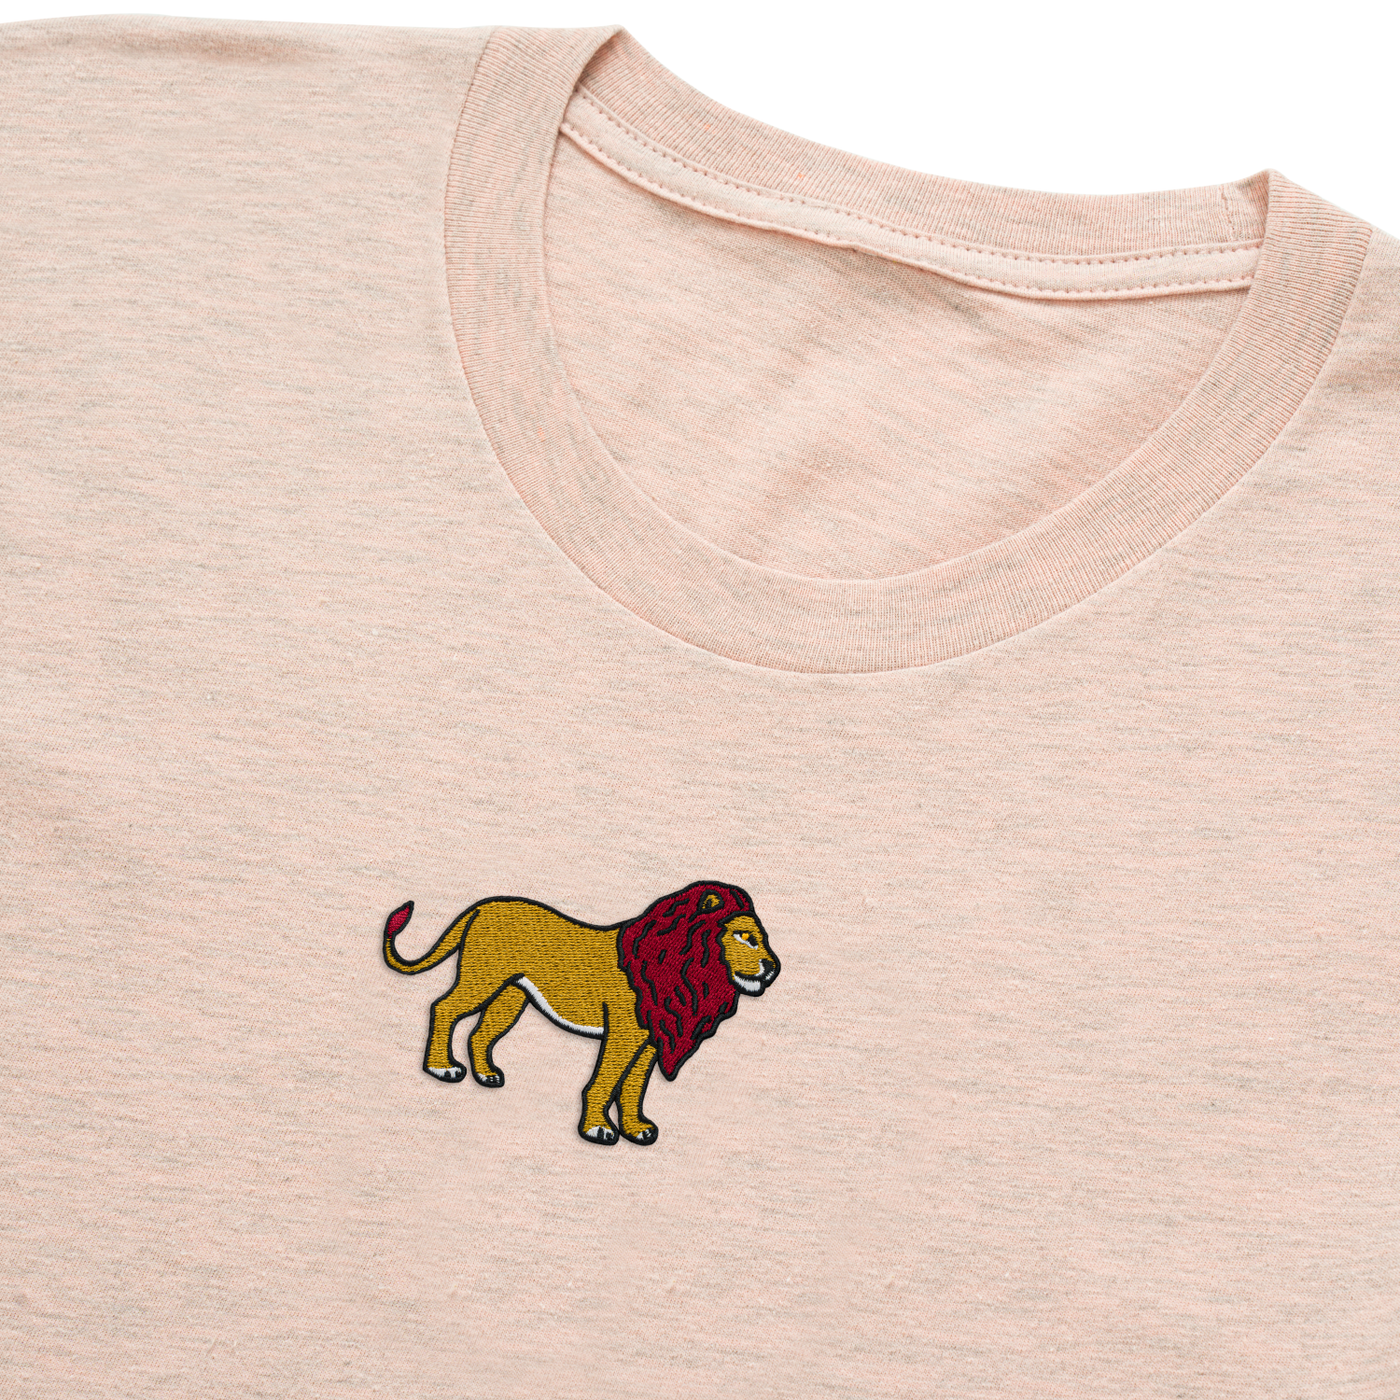 Bobby's Planet Women's Embroidered Lion T-Shirt from African Animals Collection in Heather Prism Peach Color#color_heather-prism-peach